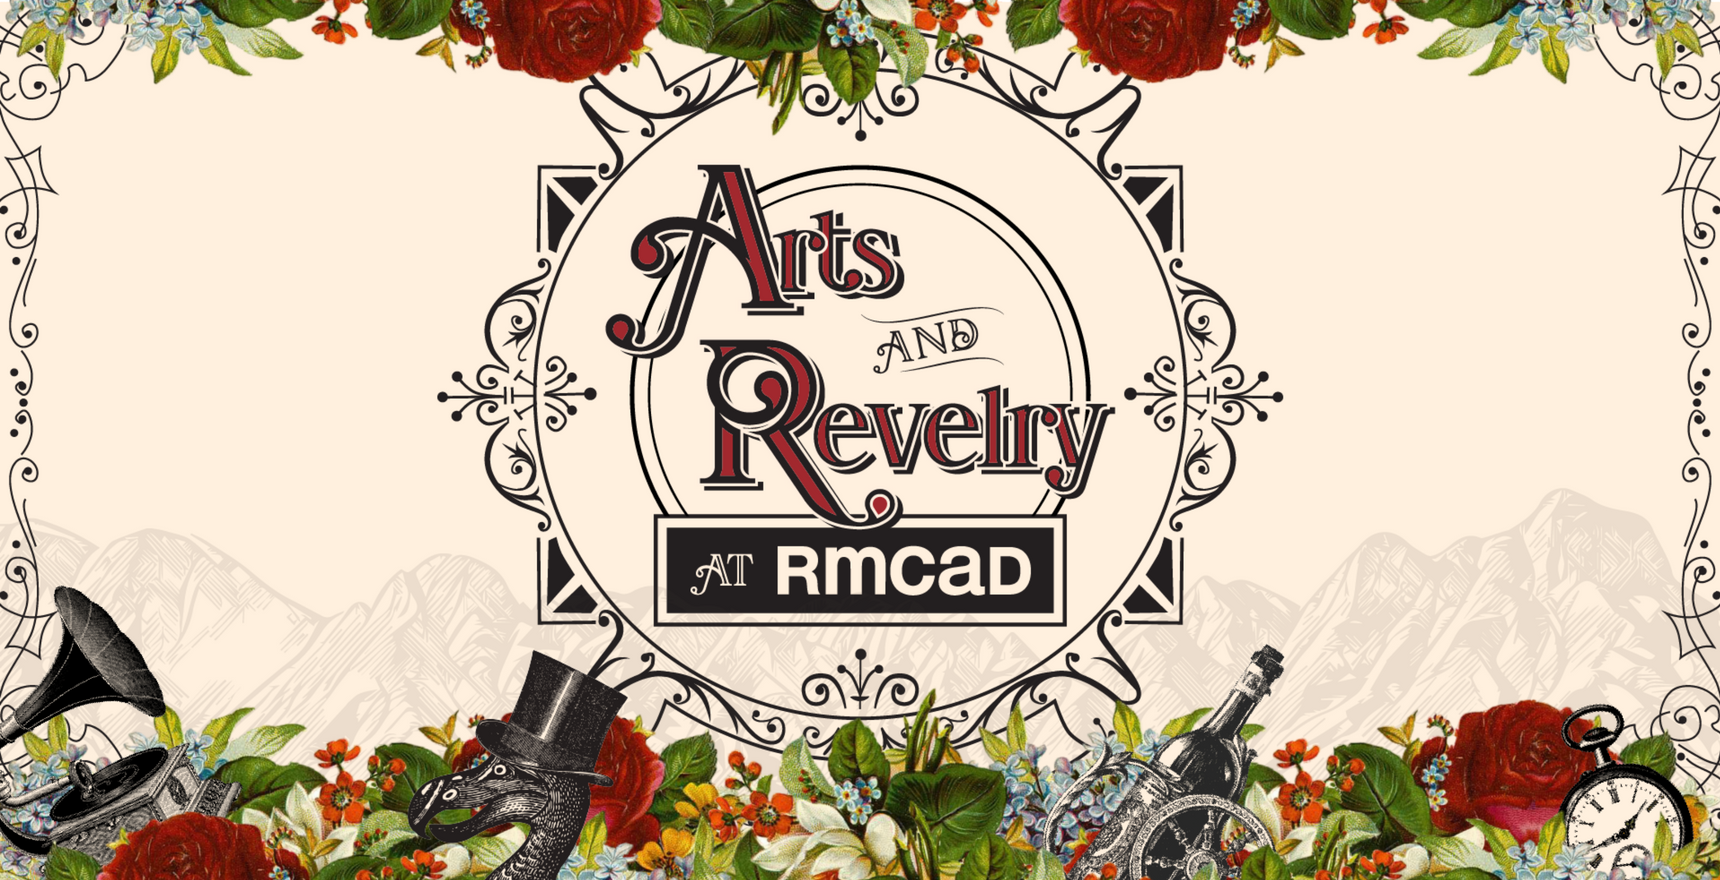 Arts and revelry graphic